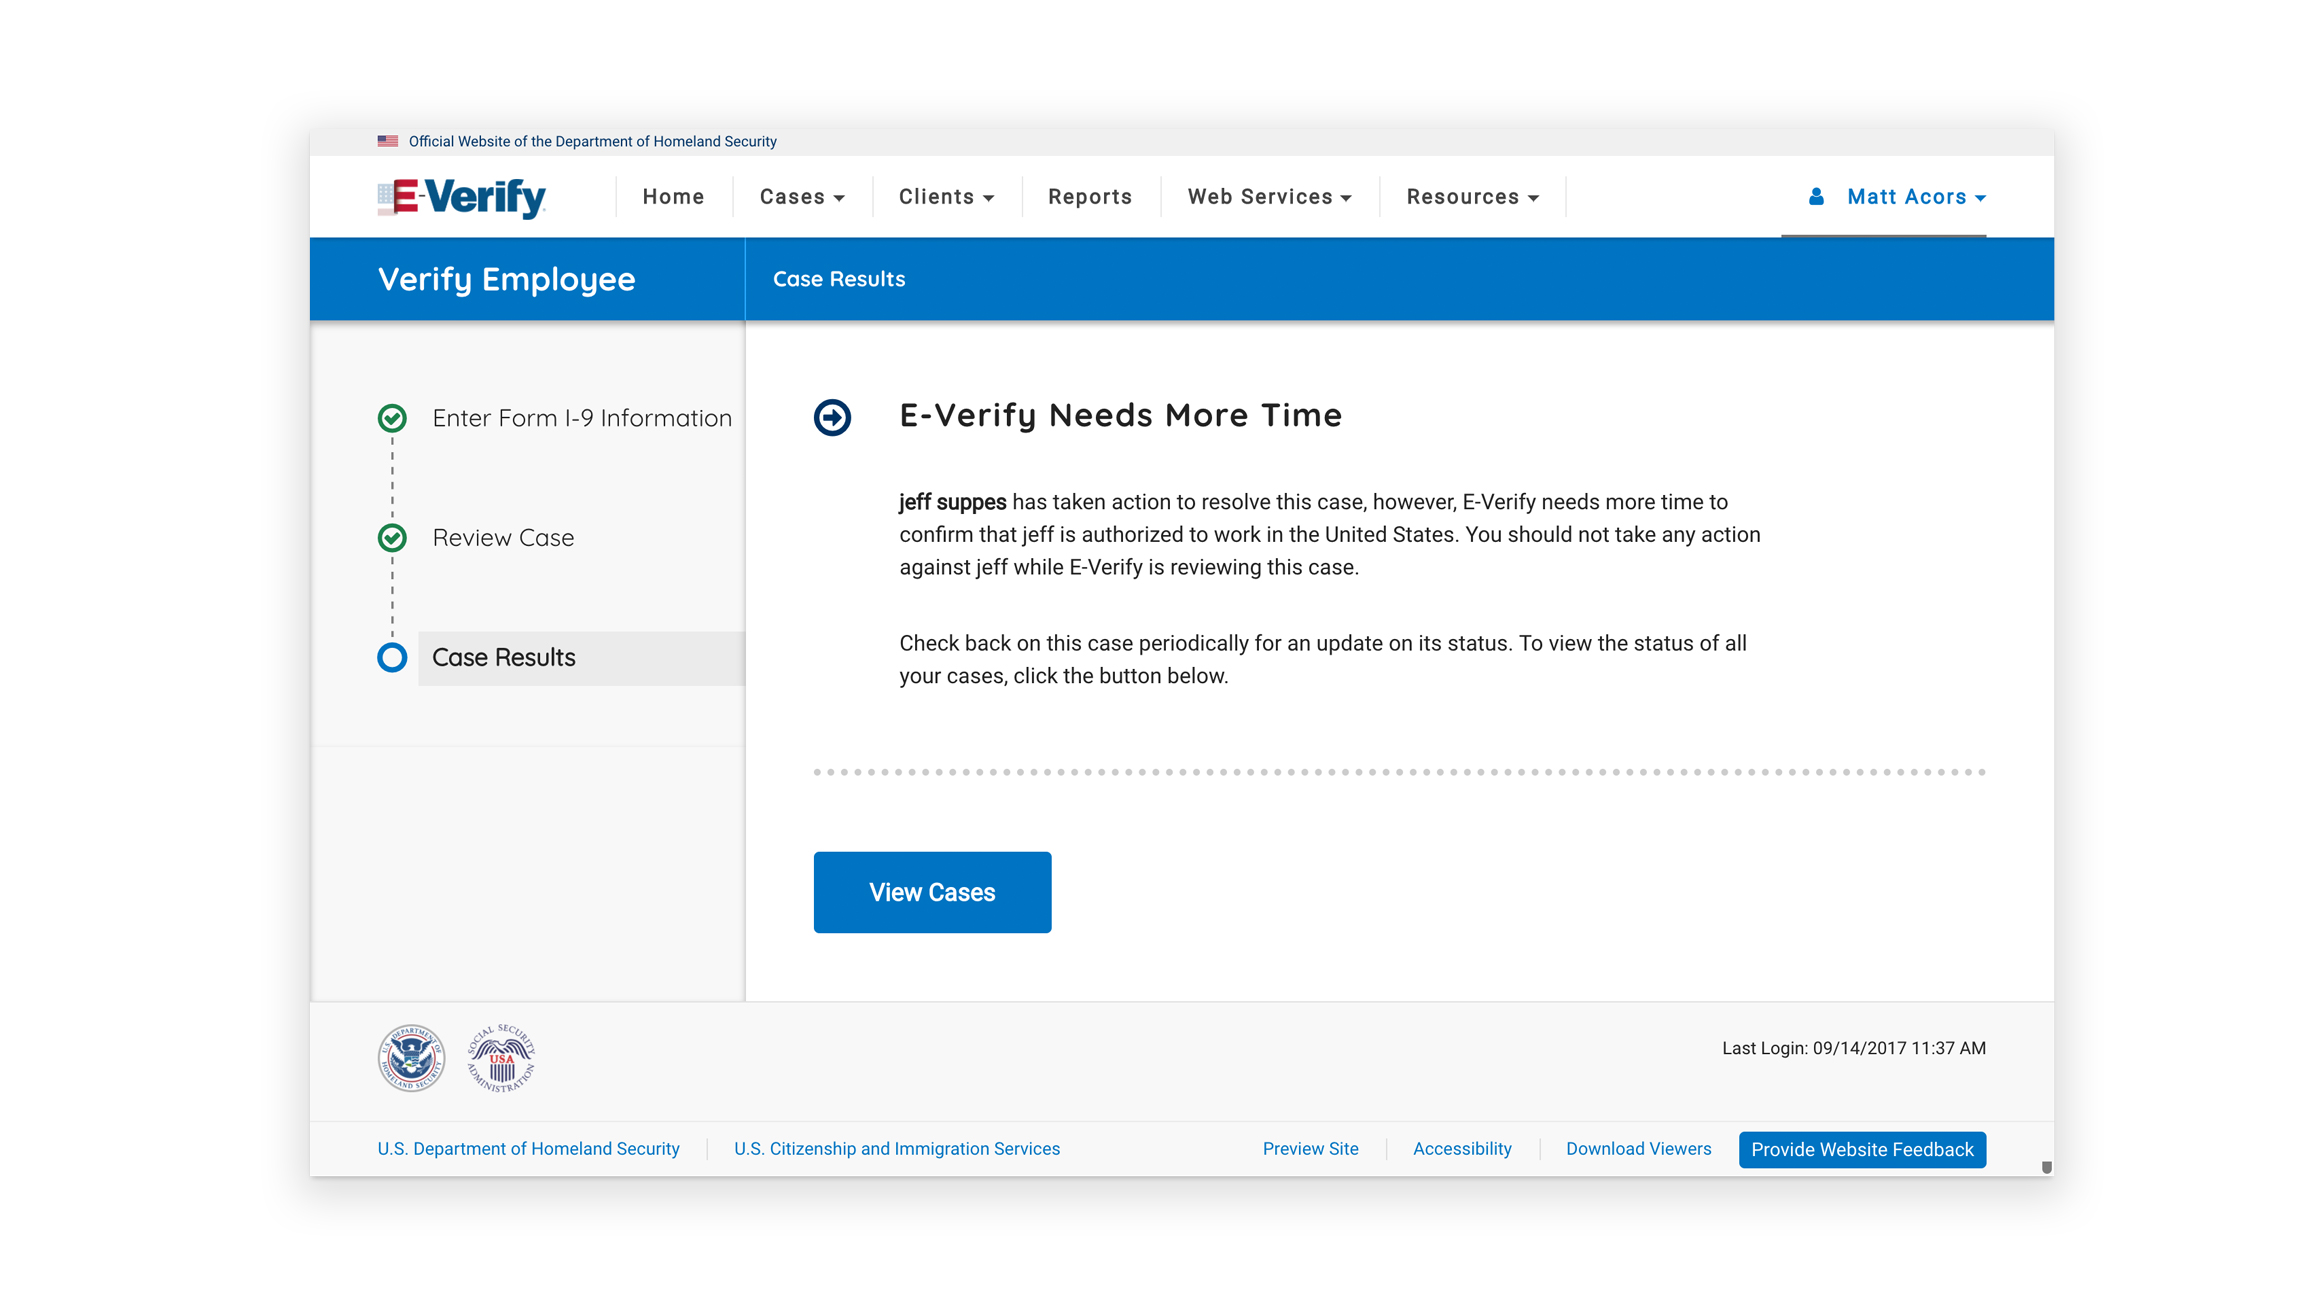 Images of the new e-verify design featuring more plain language guidance